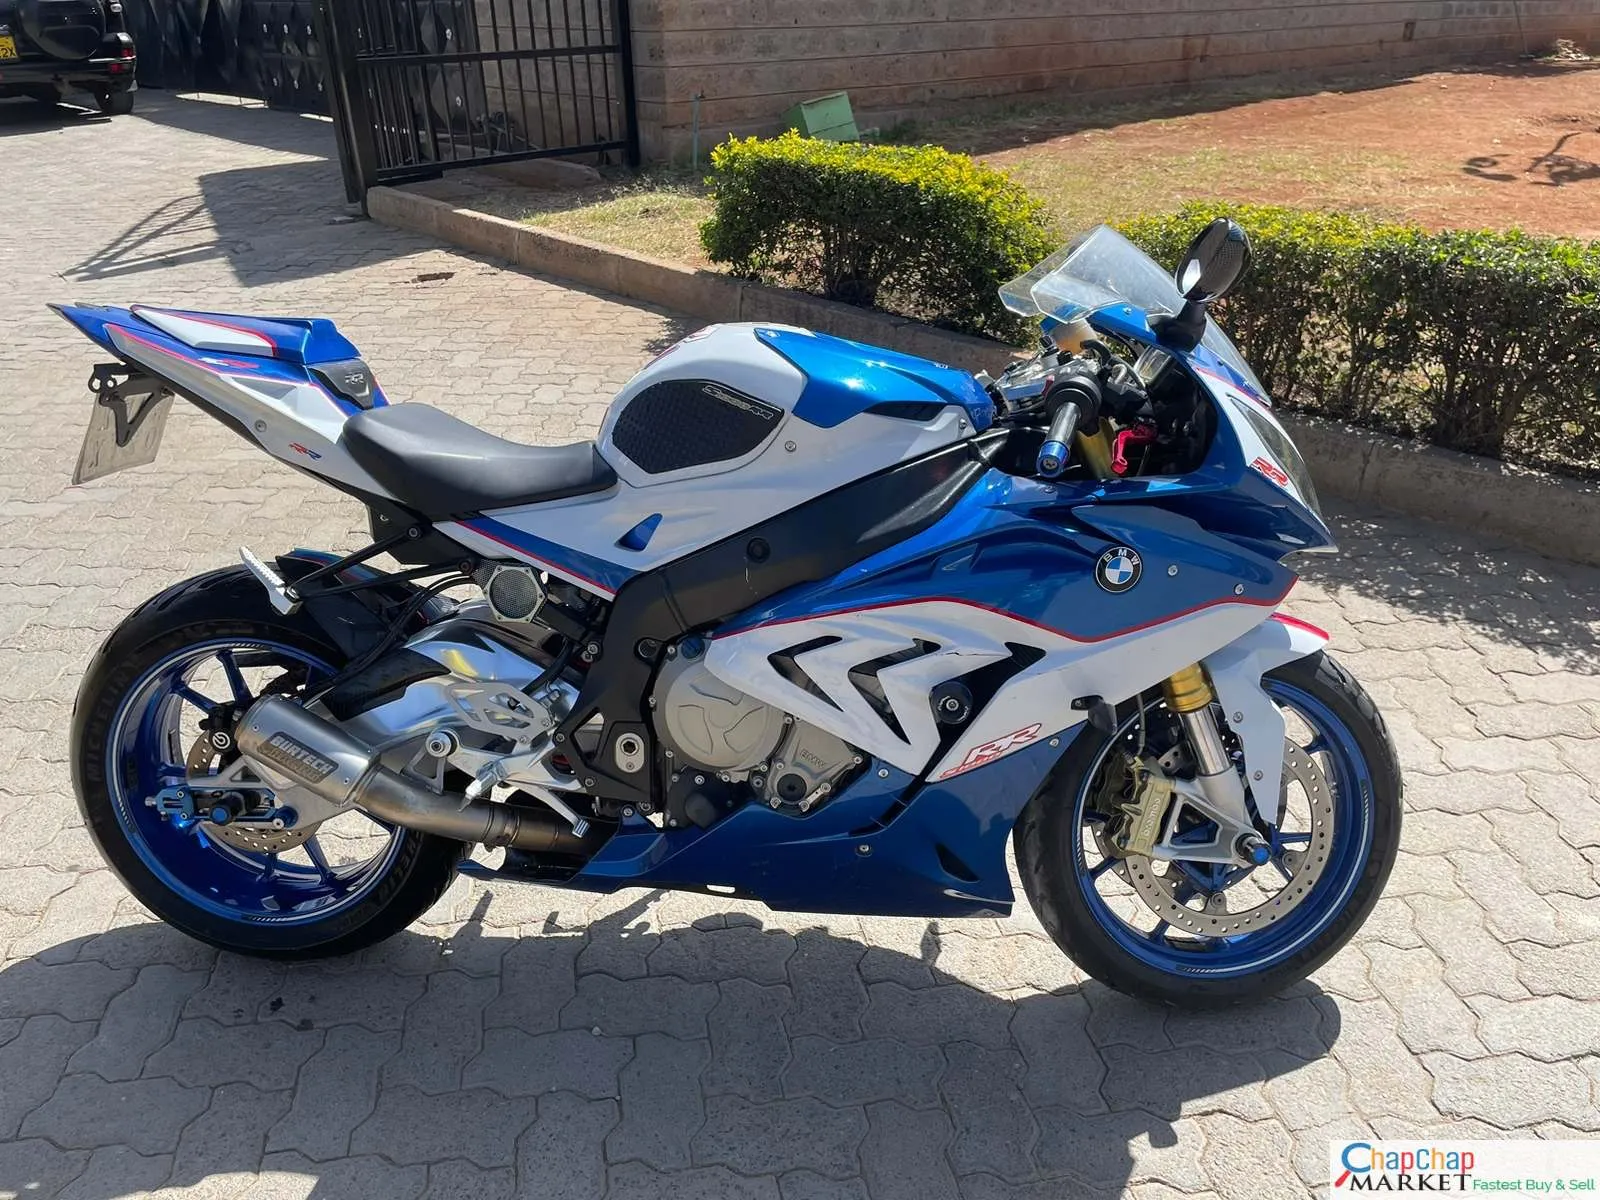 Cars Cars For Sale/Vehicles-BMW RR S1000RR 2016 Model 1000cc Motorcycle HOT 🔥🔥 5